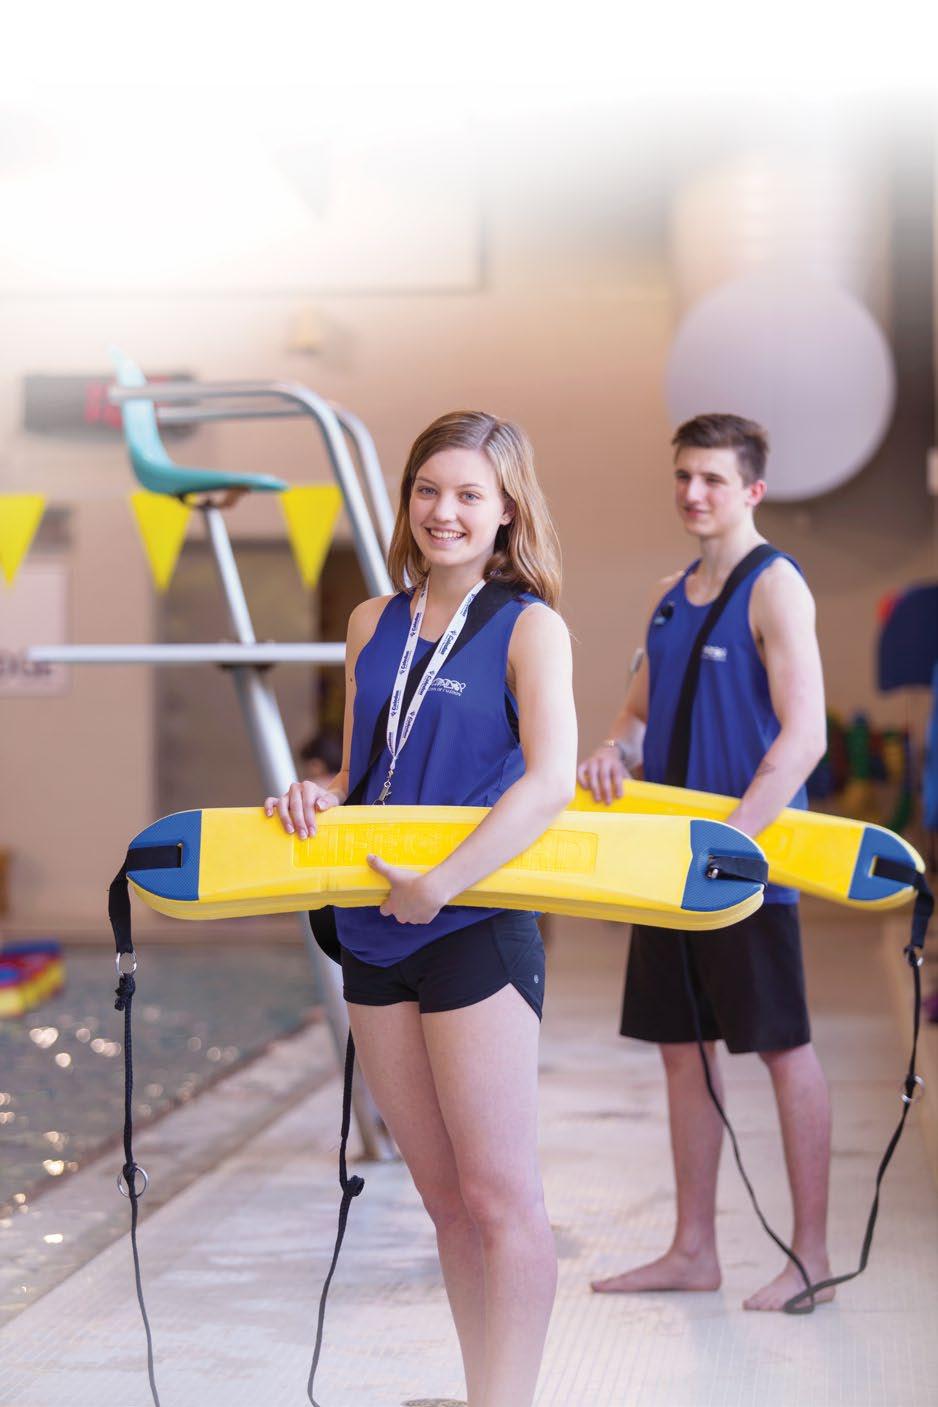 Come work for us Caledon Parks & Recreation is looking for enthusiastic, responsible youth and adults to join our aquatics team as Swim Instructors, Lifeguards and Deck Supervisors.